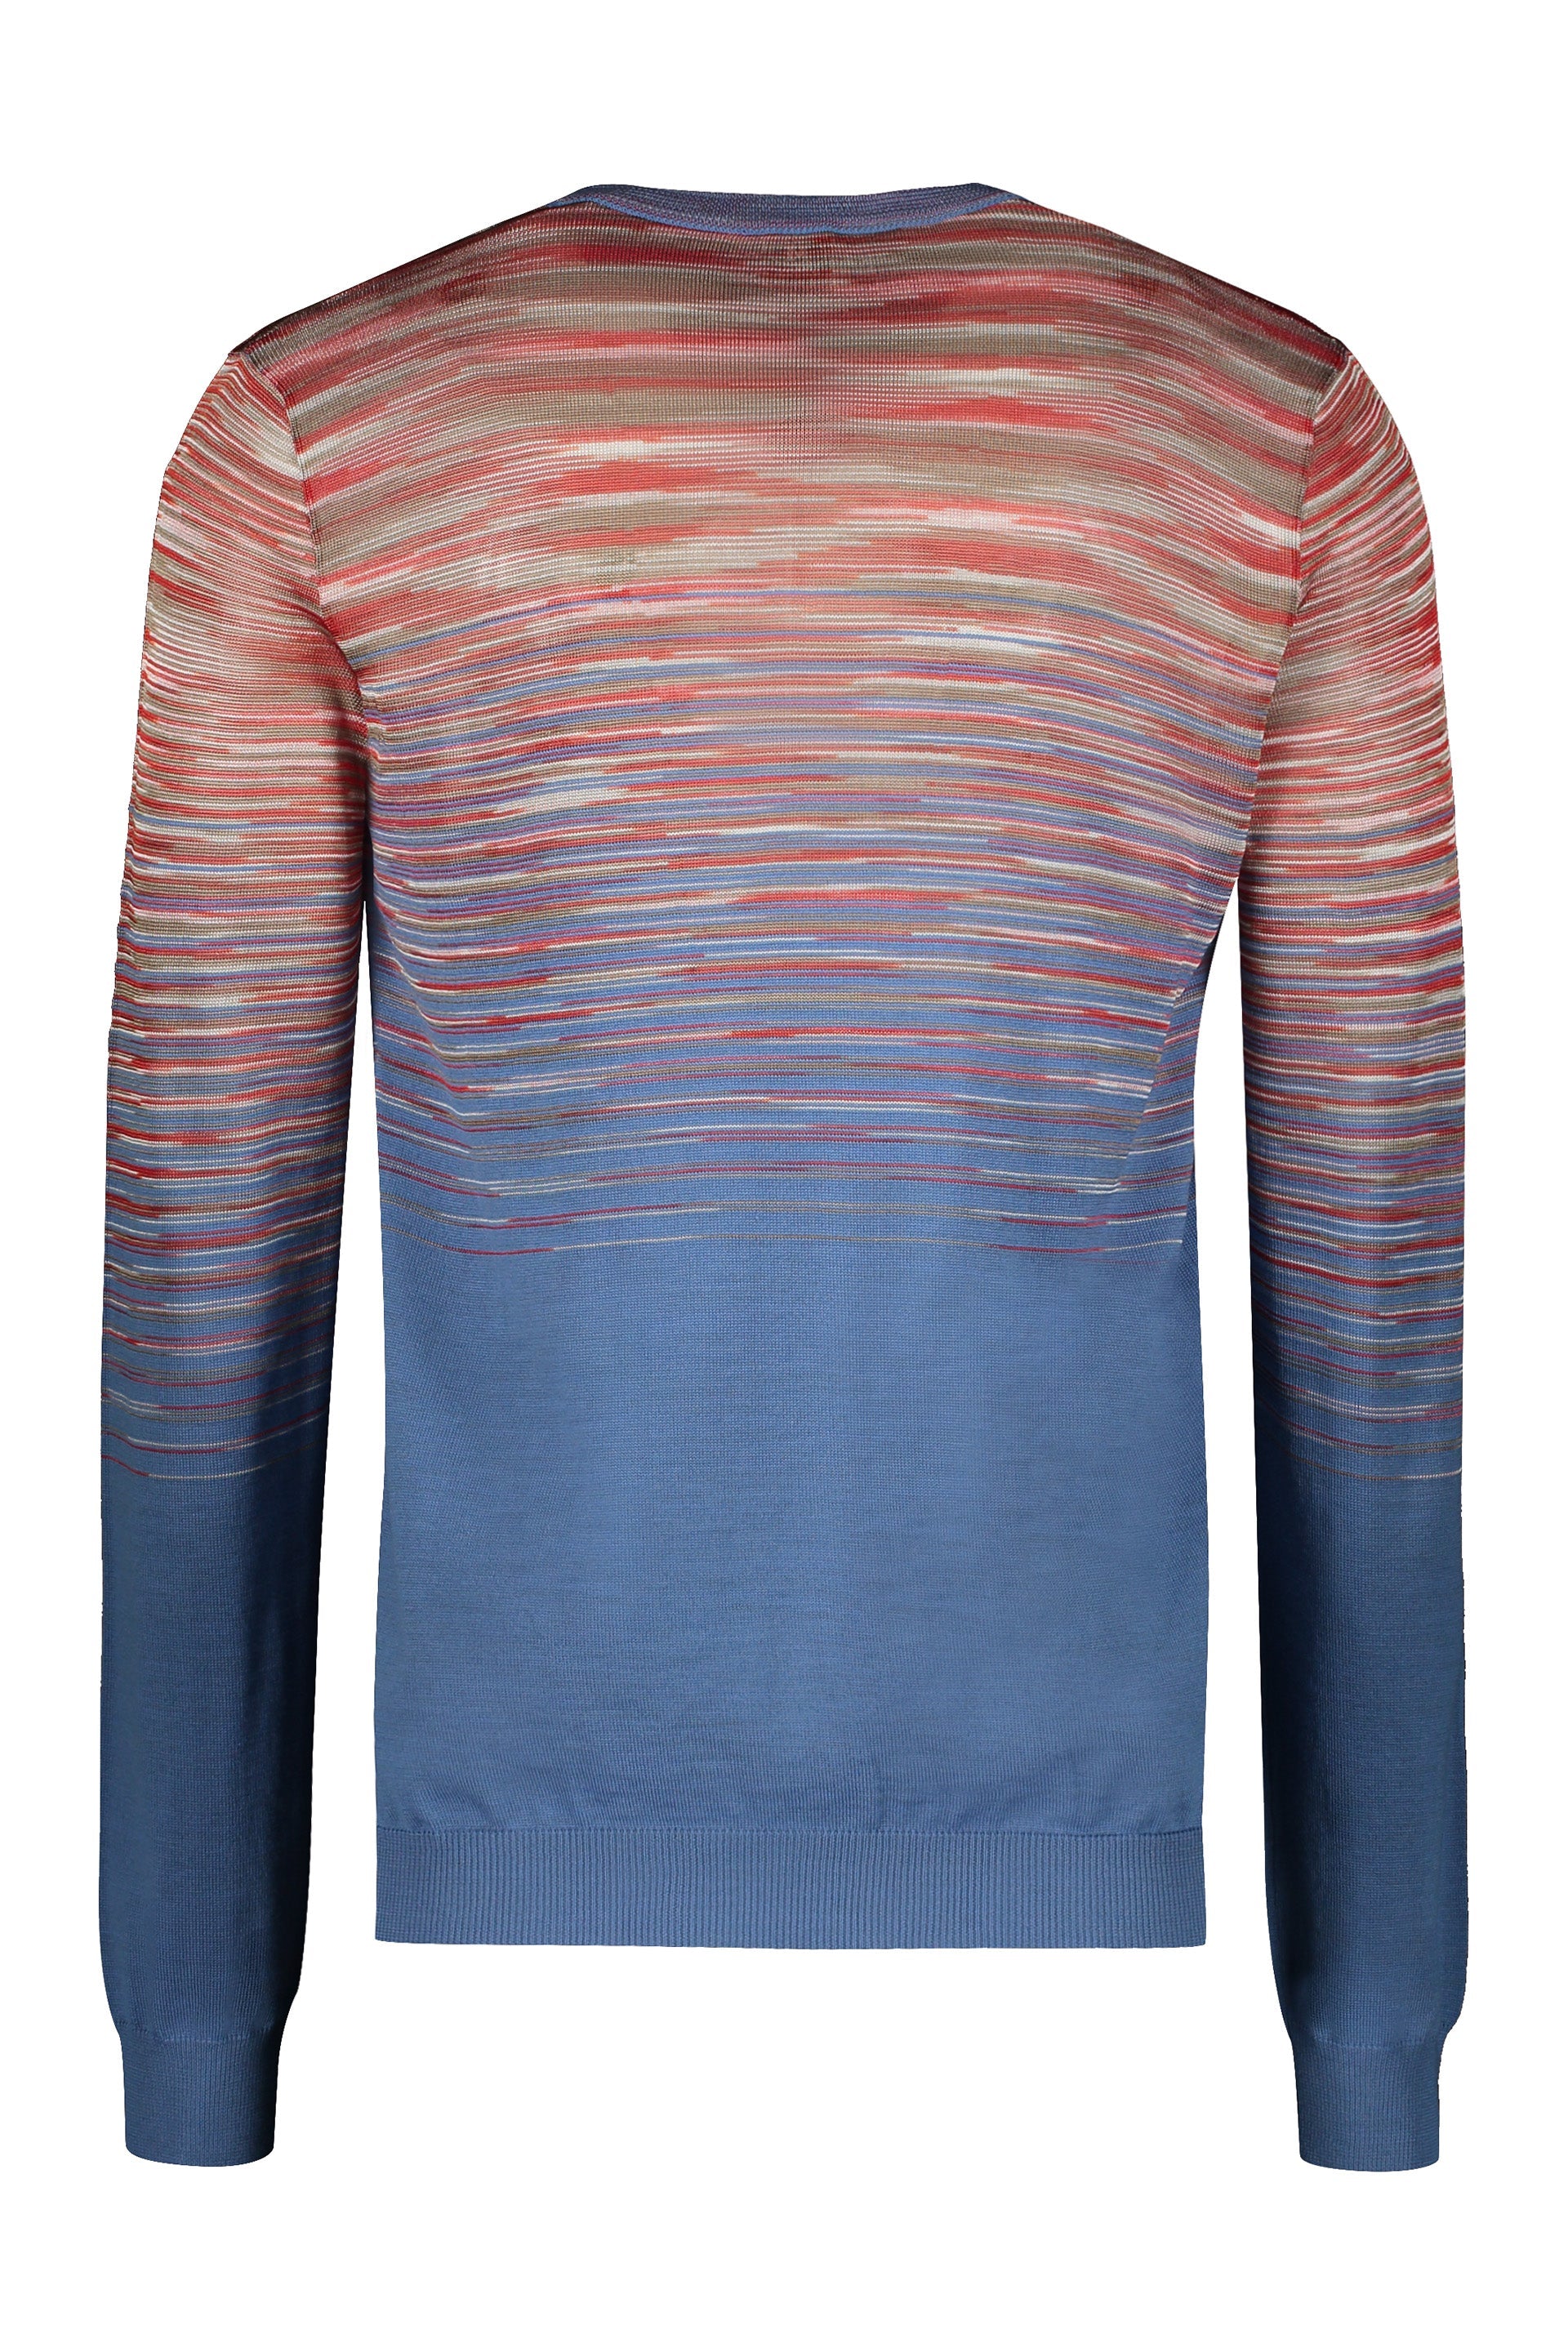 Missoni-OUTLET-SALE-Wool-V-neck-sweater-Strick-ARCHIVE-COLLECTION-2_e33b6f43-79b8-4d9c-b0c8-b738f46369eb.jpg